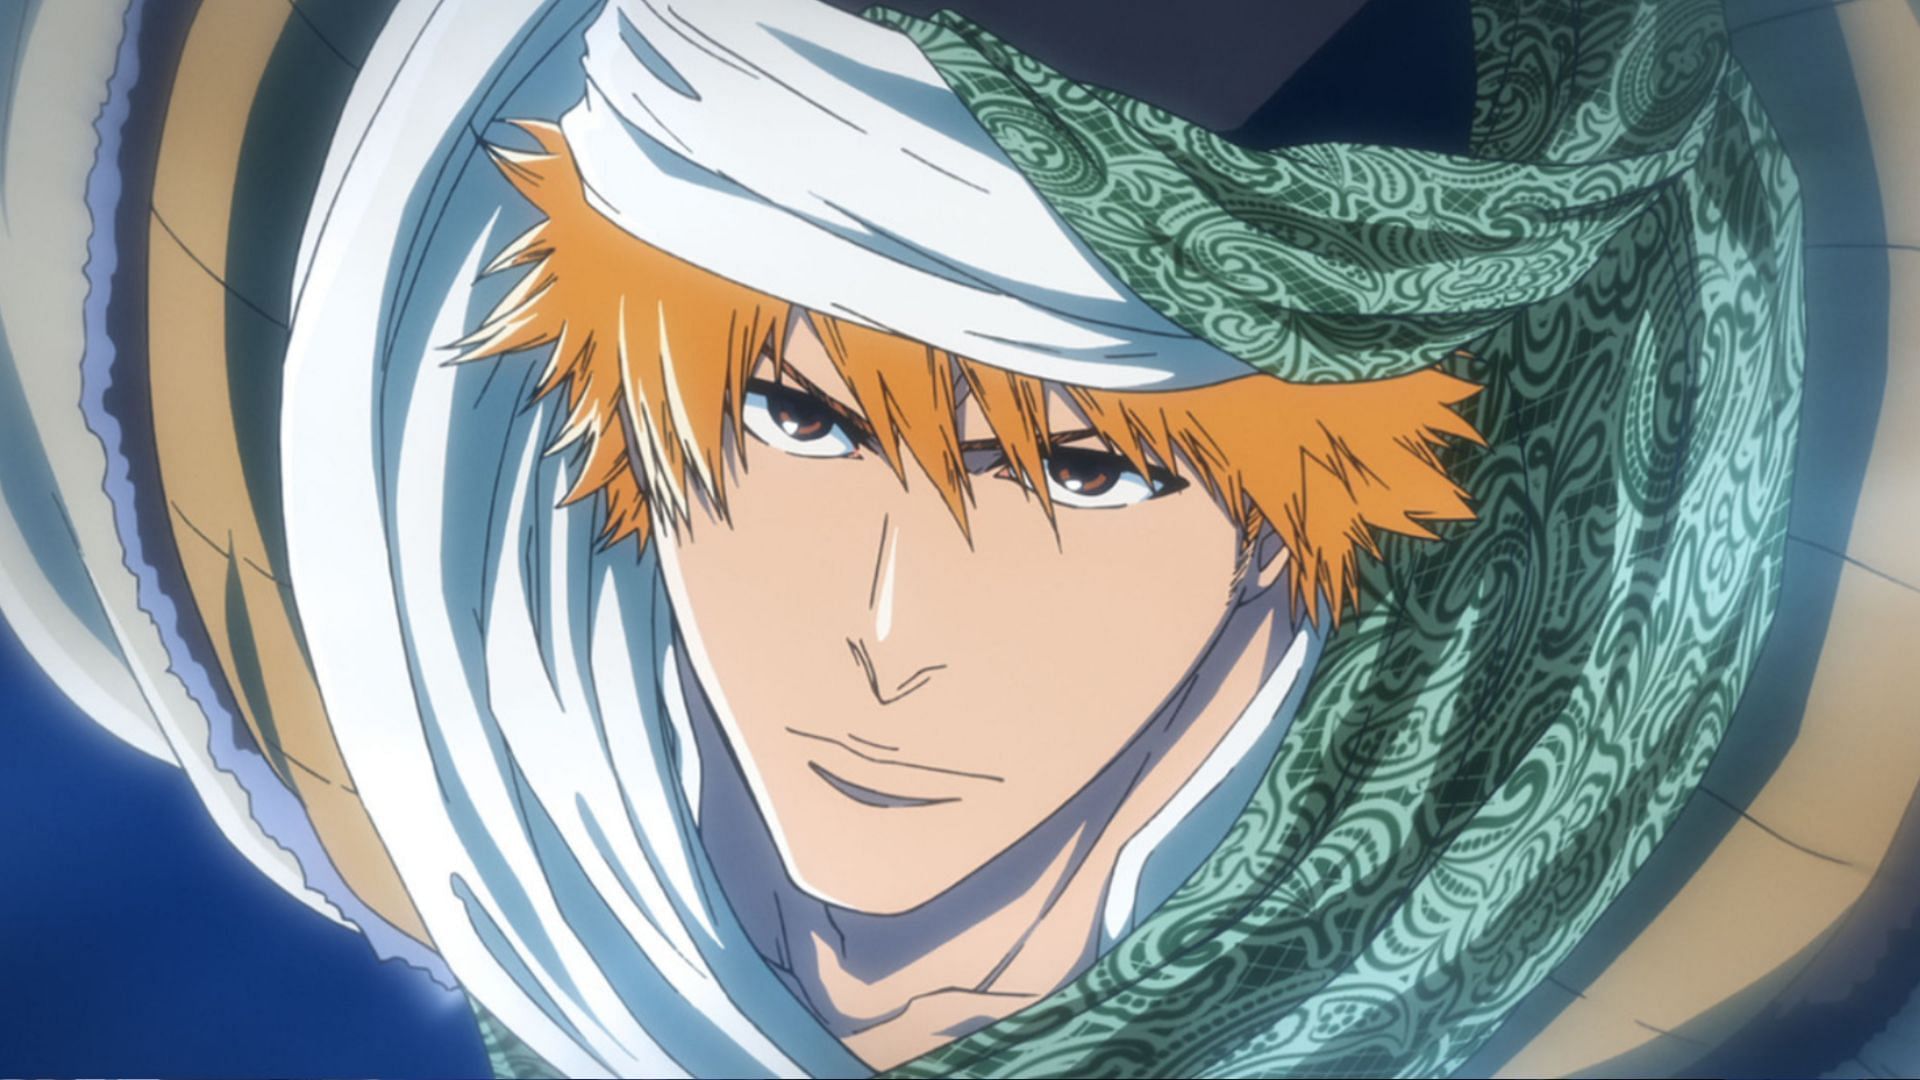 Bleach TYBW episode 19 preview hints at Ichigo returning to Soul Society